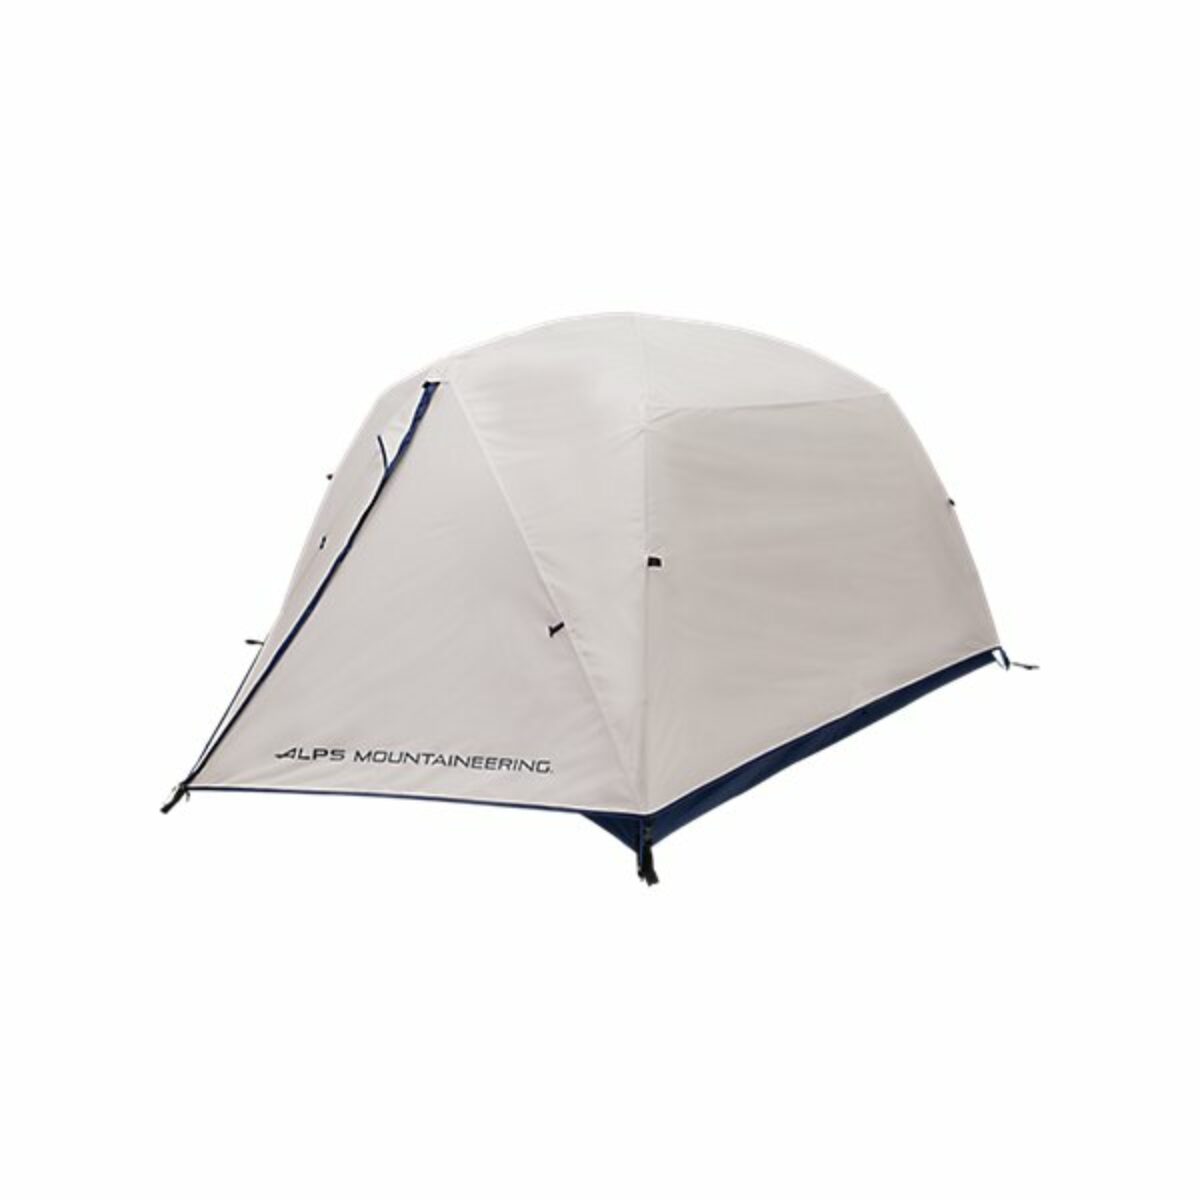 ALPS Mountaineering Lynx 3-Person Tent, Blue Green並行輸入